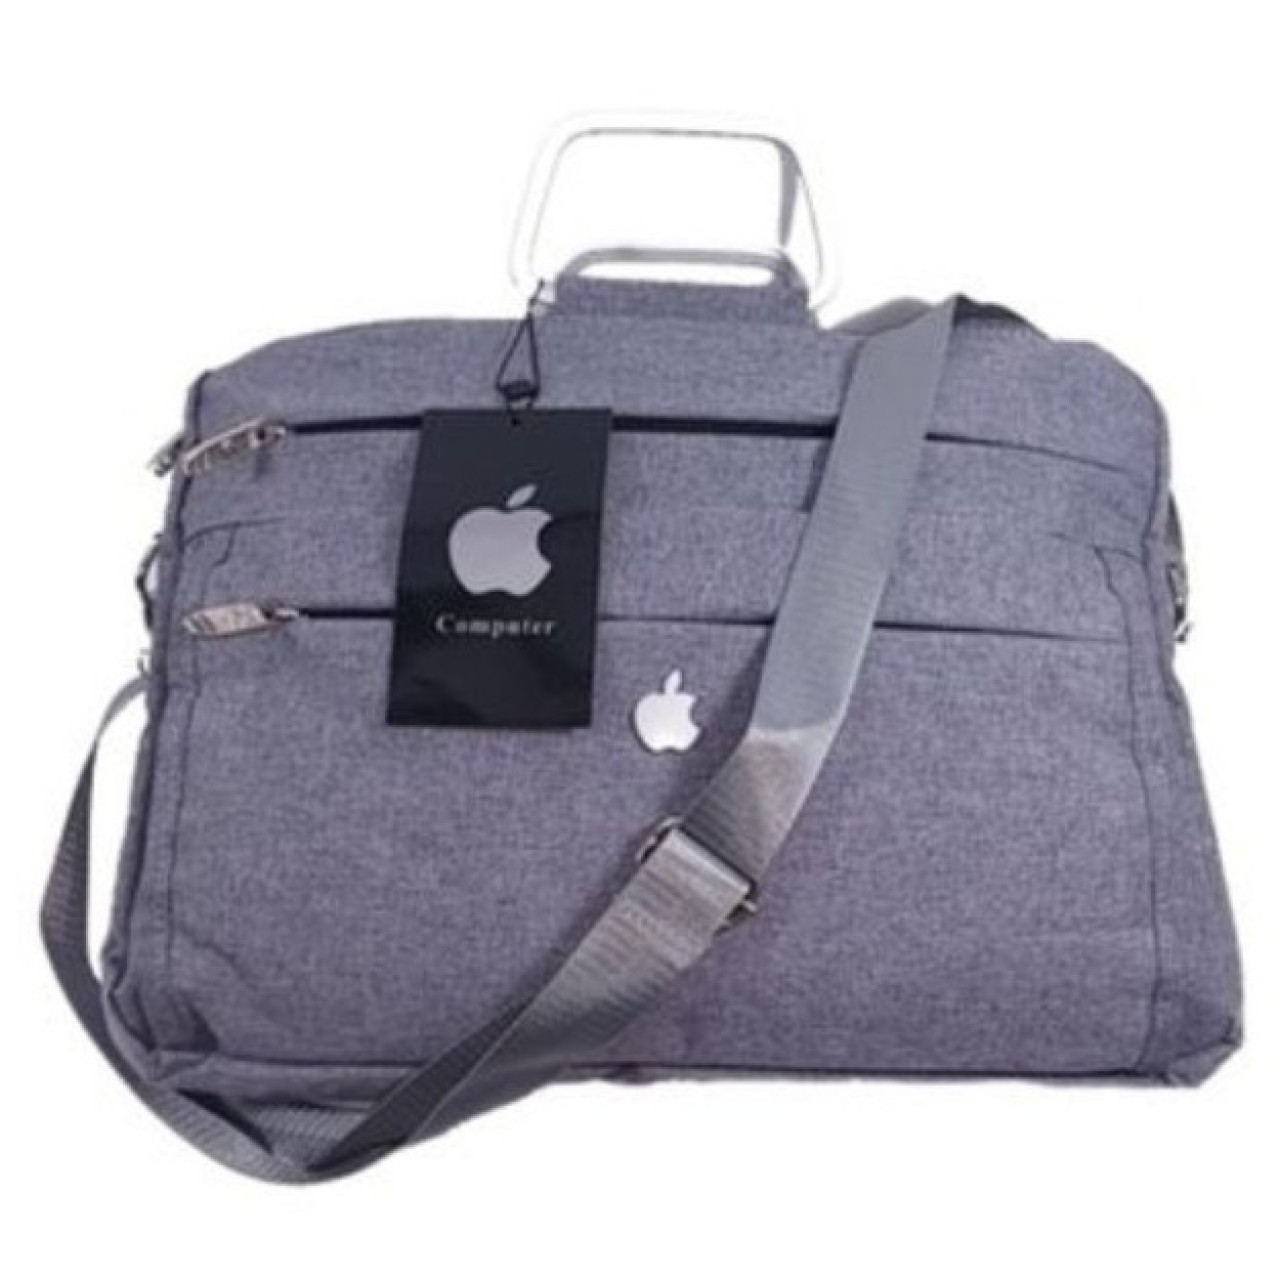 Frosted Fabric Macbook Bag 13.3Inch Air/Pro/Retina/Touch Bar - Laptop Bag